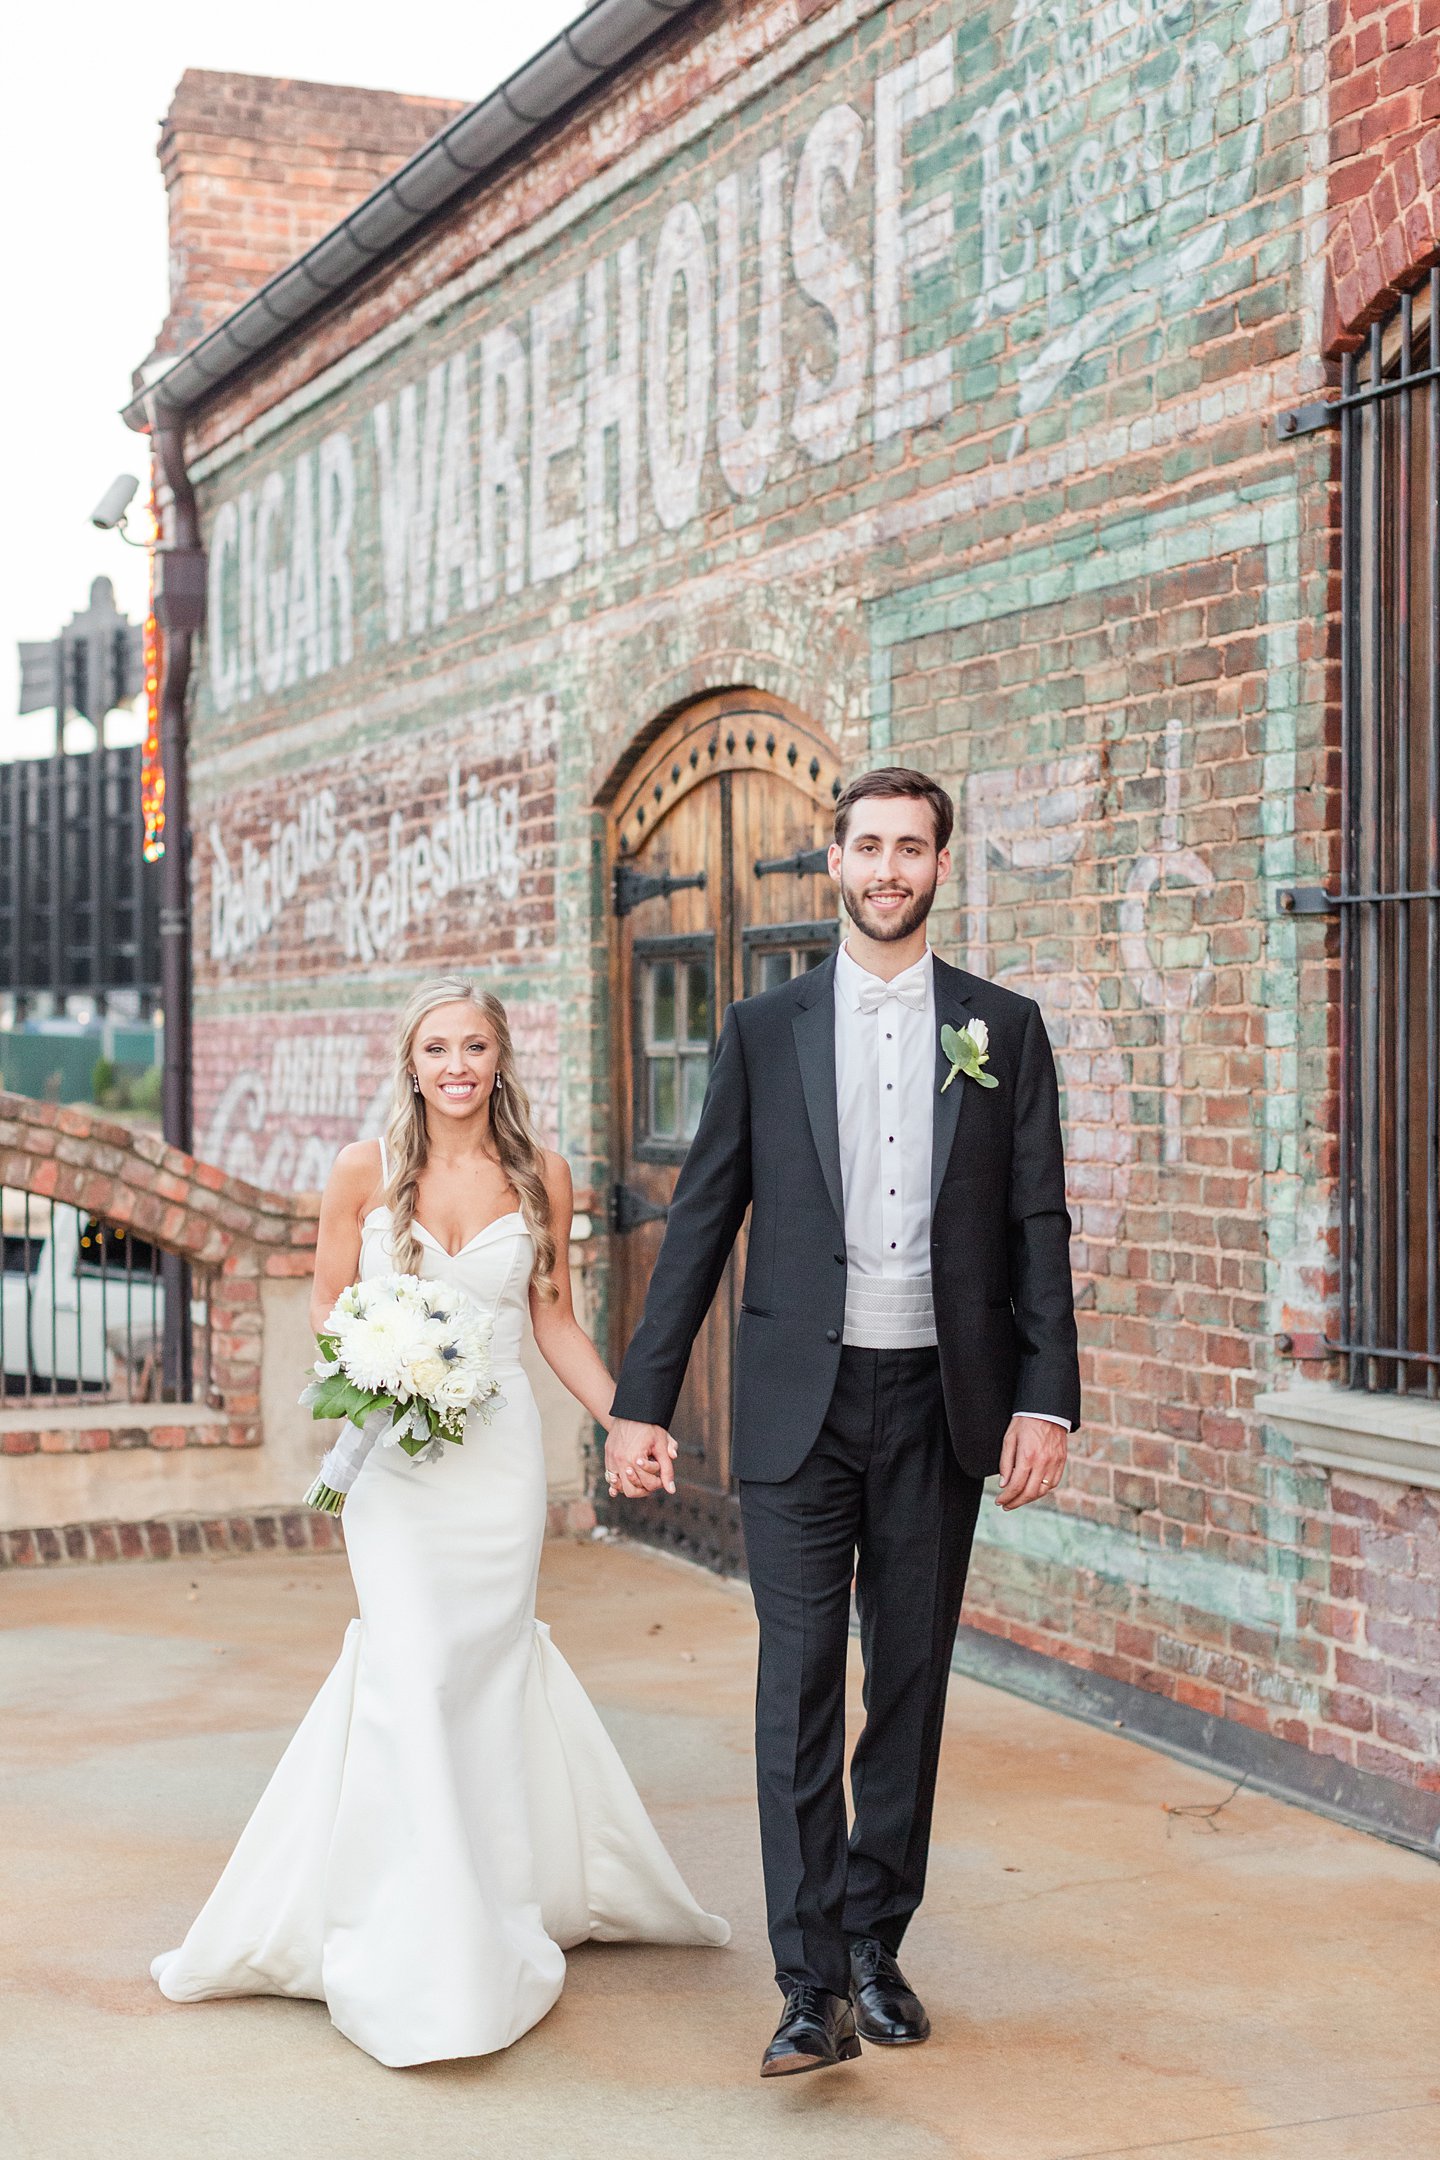 bride and groom wedding portrait at old cigar warehouse in greenville